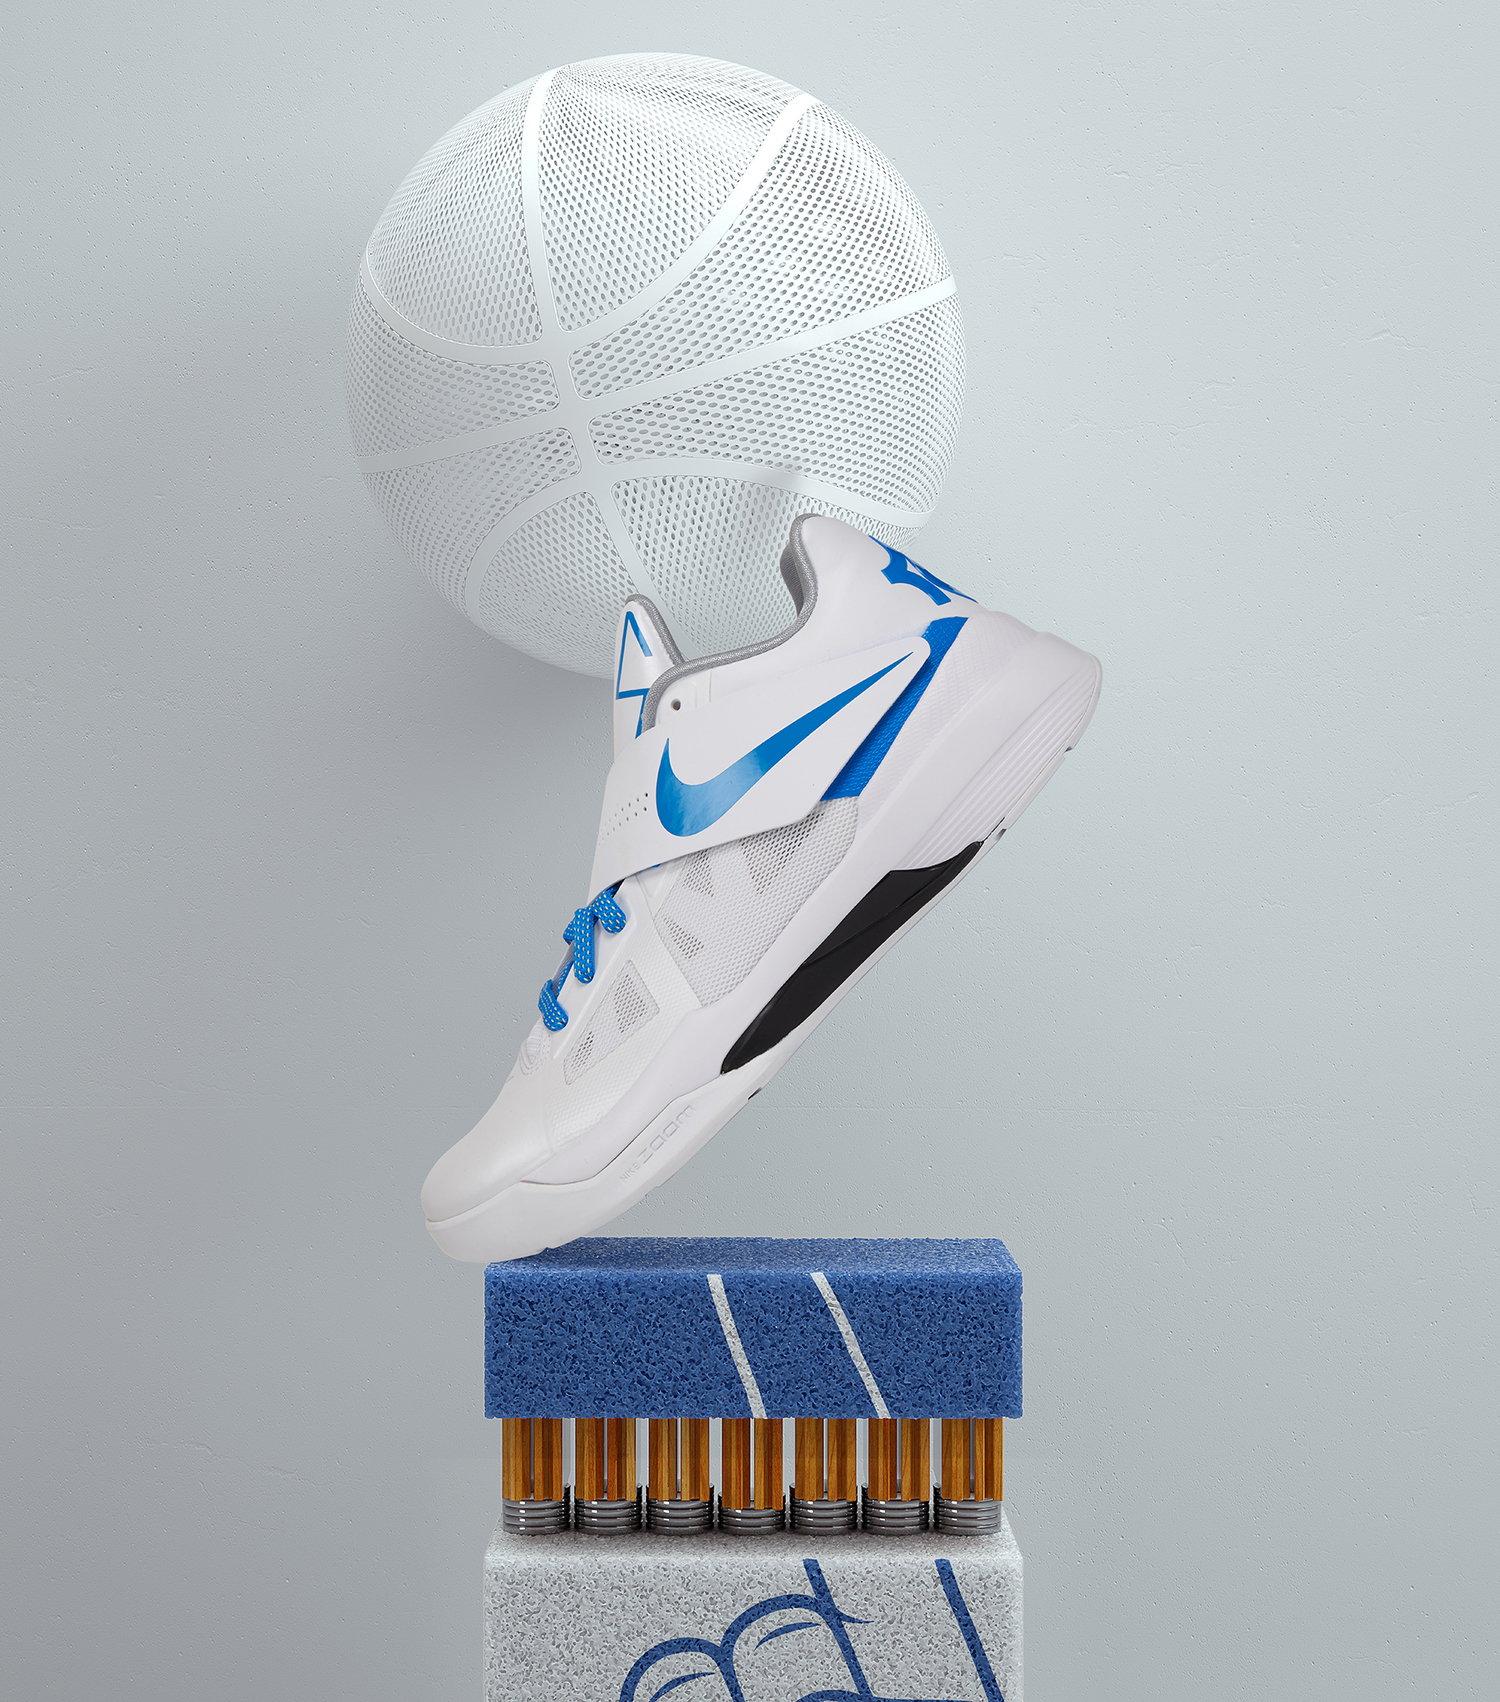 The Nike Zoom KD 4 'Battle Tested 